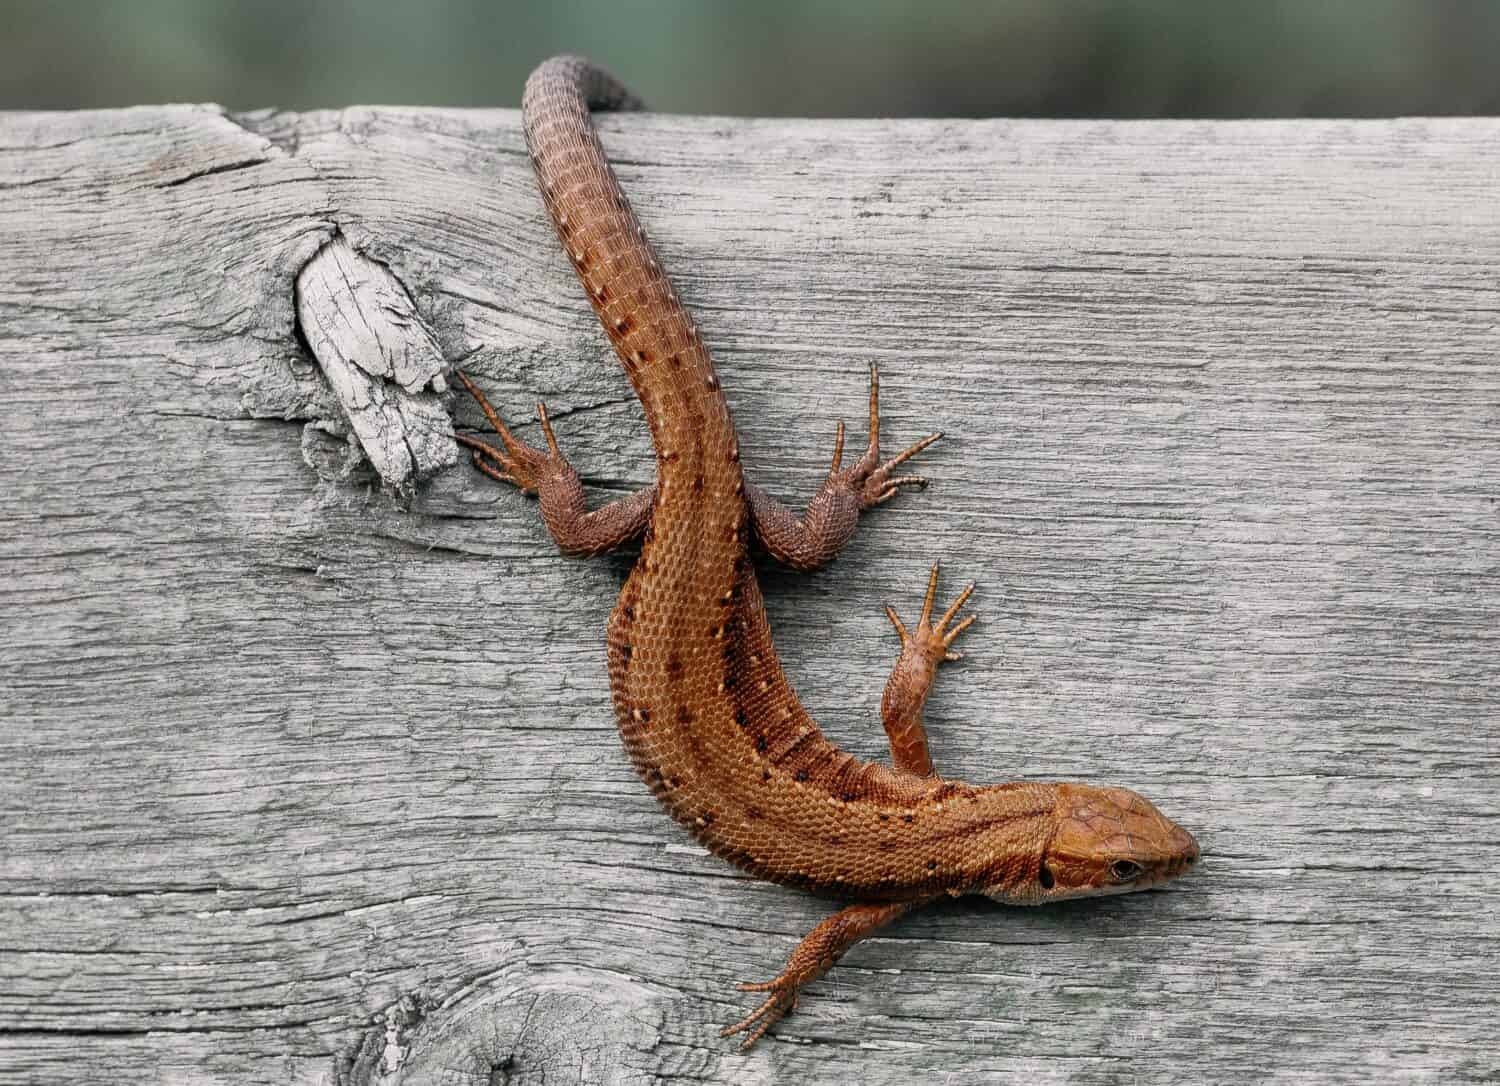 lizard poop is solid, and a characteristic grayish-brown color. It is often found in small piles under rocks or logs where lizards are known to hide.